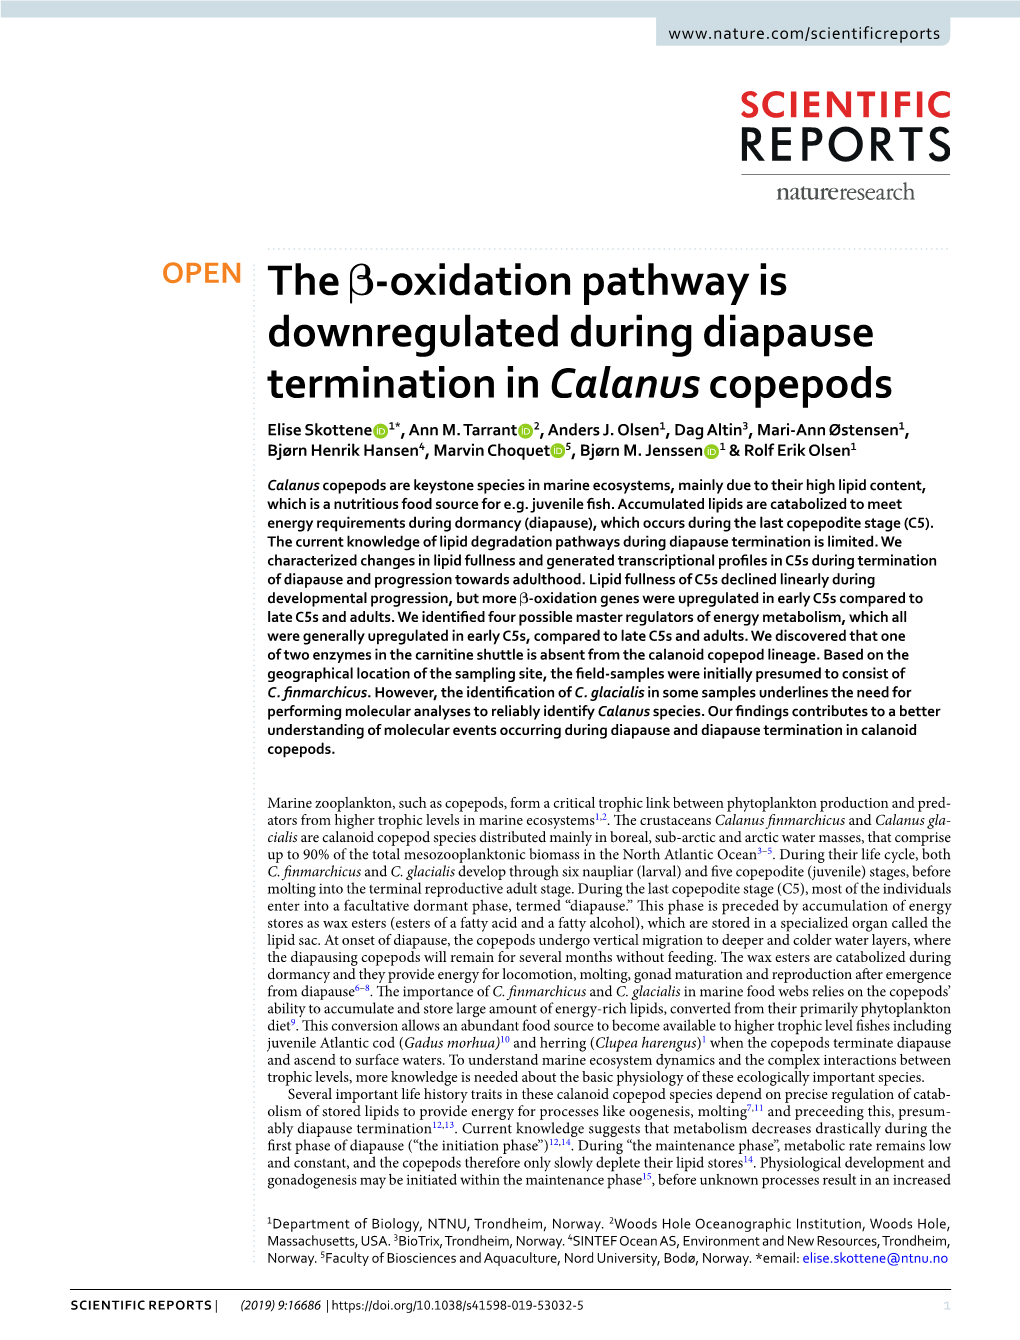 The Β-Oxidation Pathway Is Downregulated During Diapause Termination in Calanus Copepods Elise Skottene 1*, Ann M